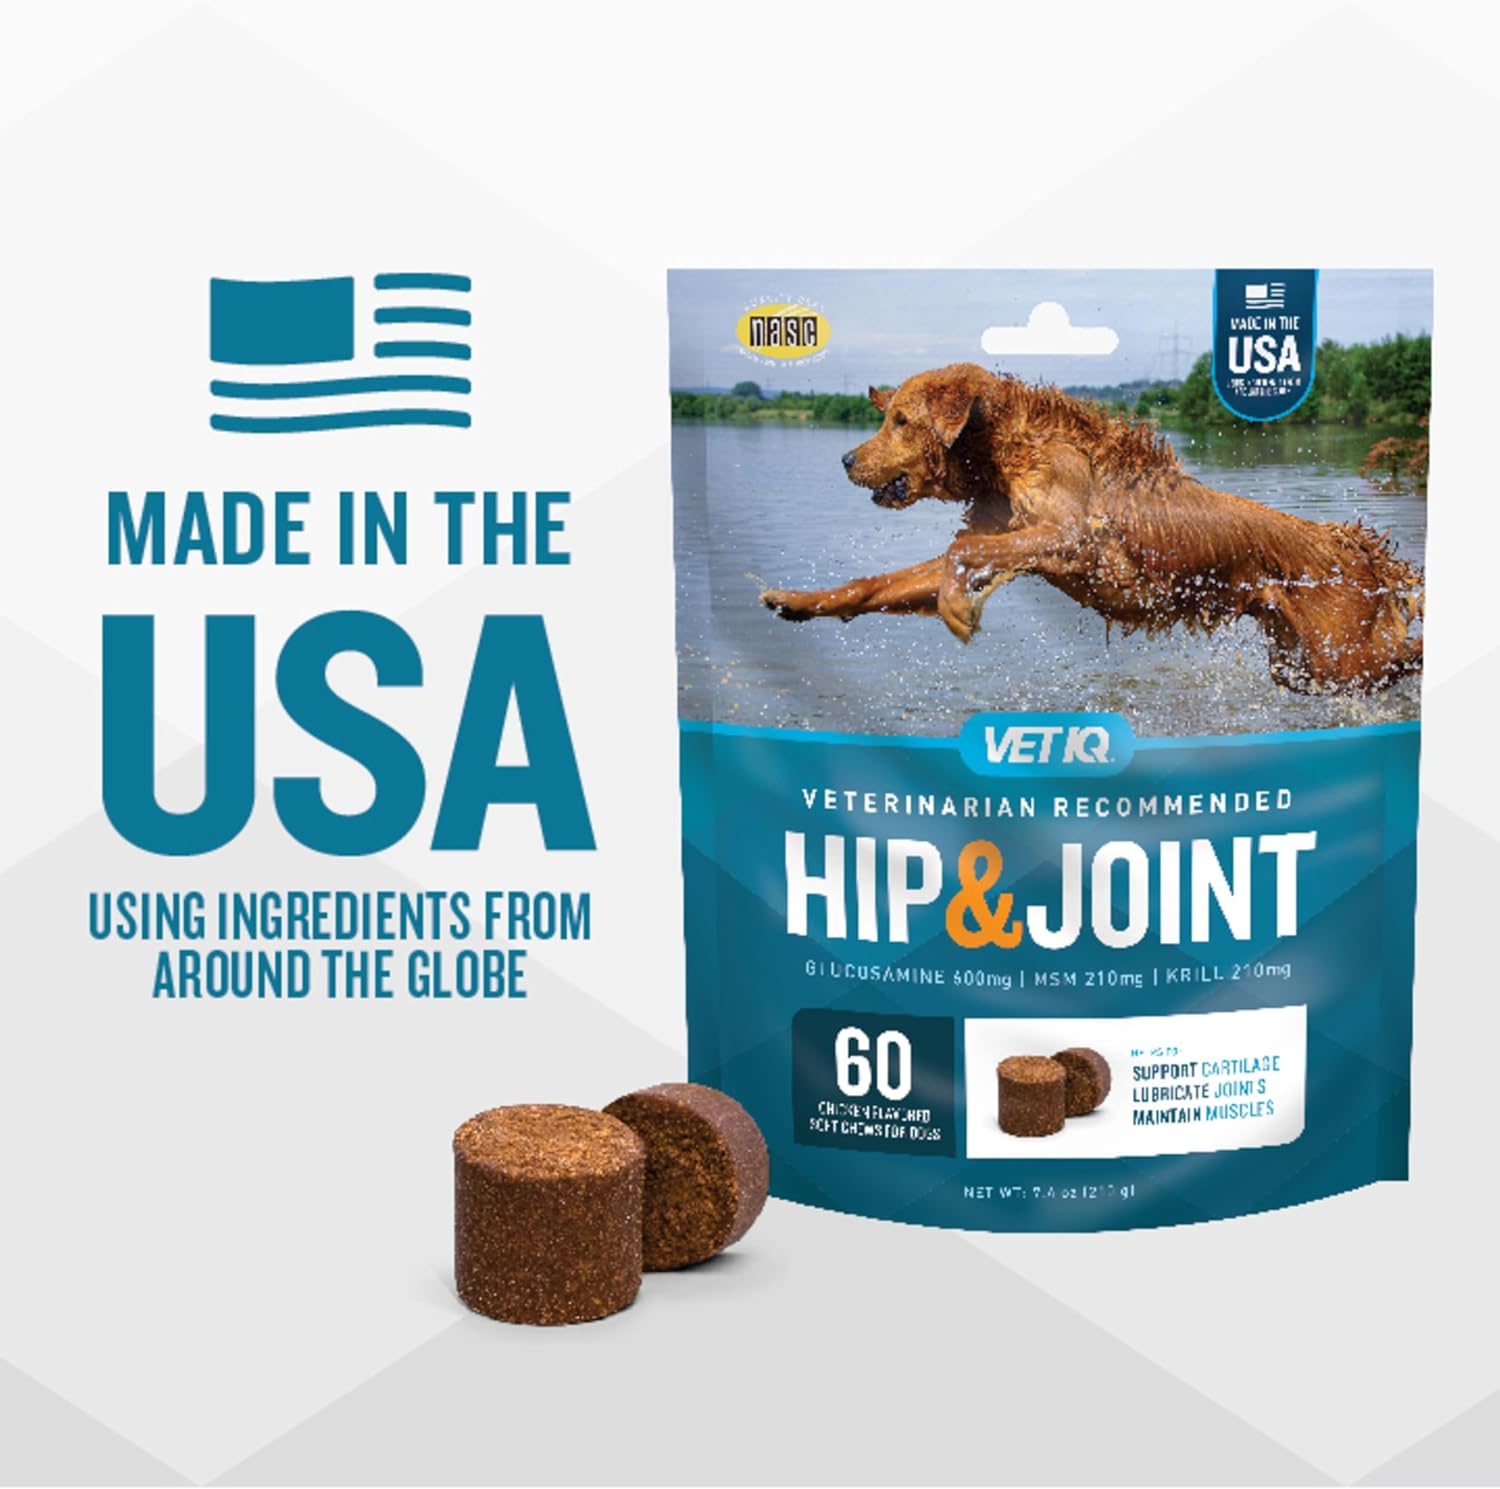 VetIQ Glucosamine Hip & Joint Supplement for Dogs, 180 Soft Chews, Dog Joint Support Supplement with MSM and Krill, Dog Health Supplies Large & Small Breed, Chicken Flavored Chewables : Pet Supplies